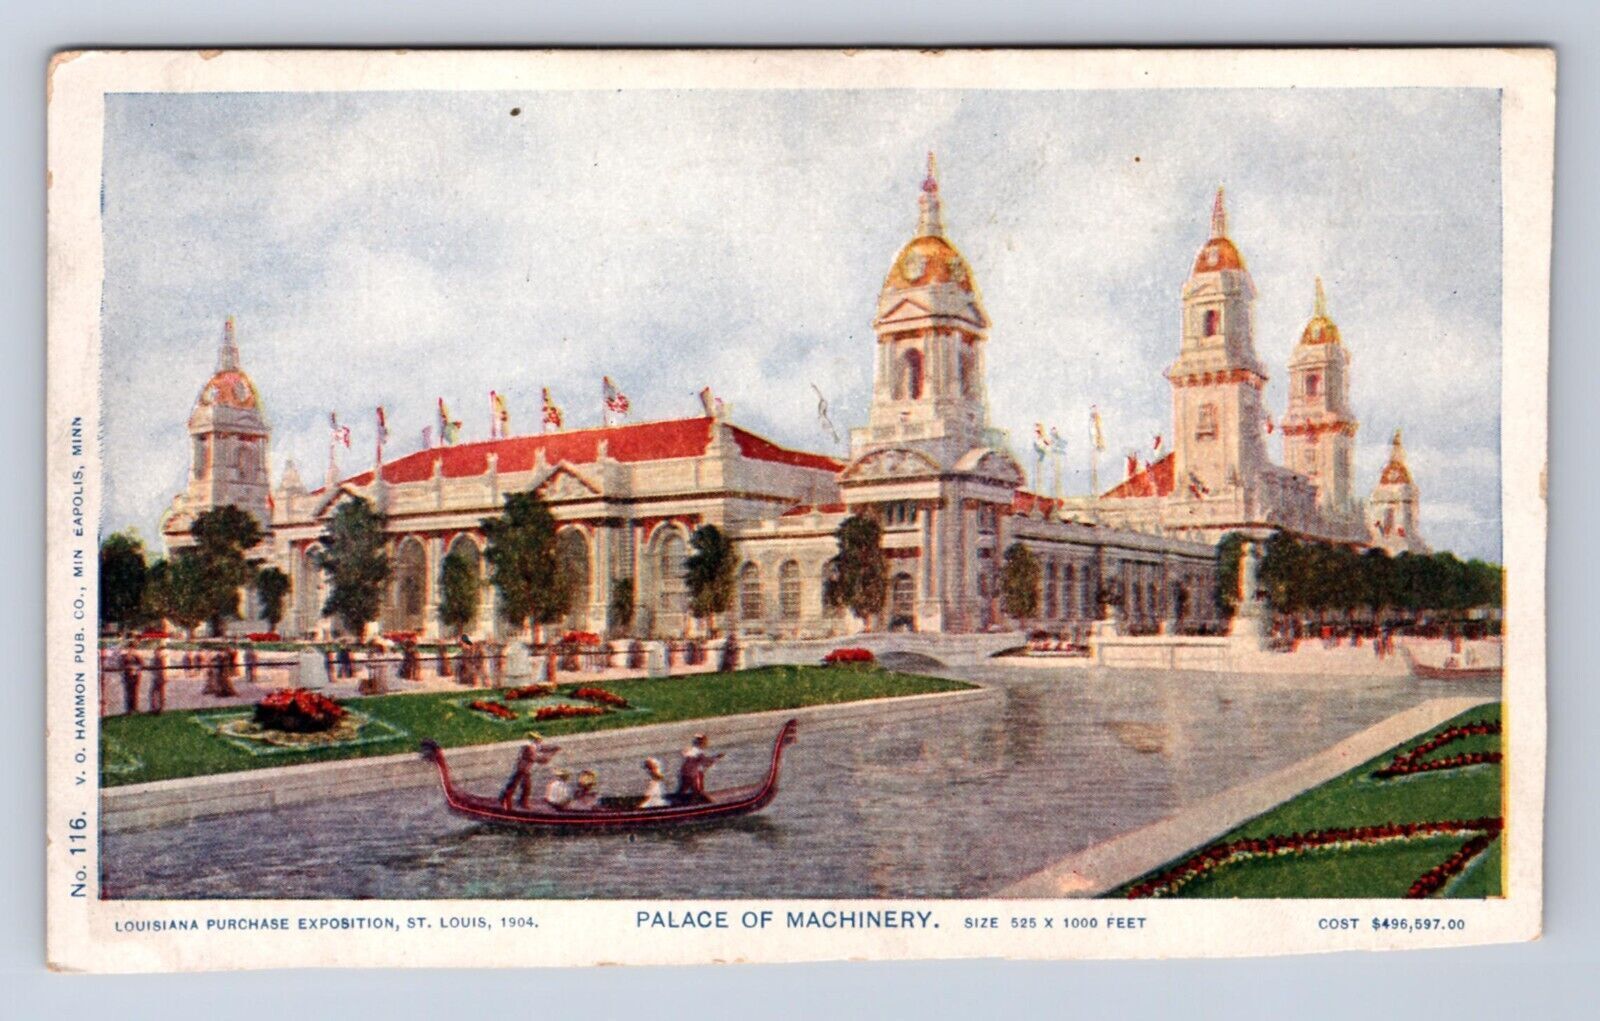 VINTAGE C1900S PALACE OF MACHINERY LOUISIANA PURCHASE EXPO ST LOUIS POSTCARD FE